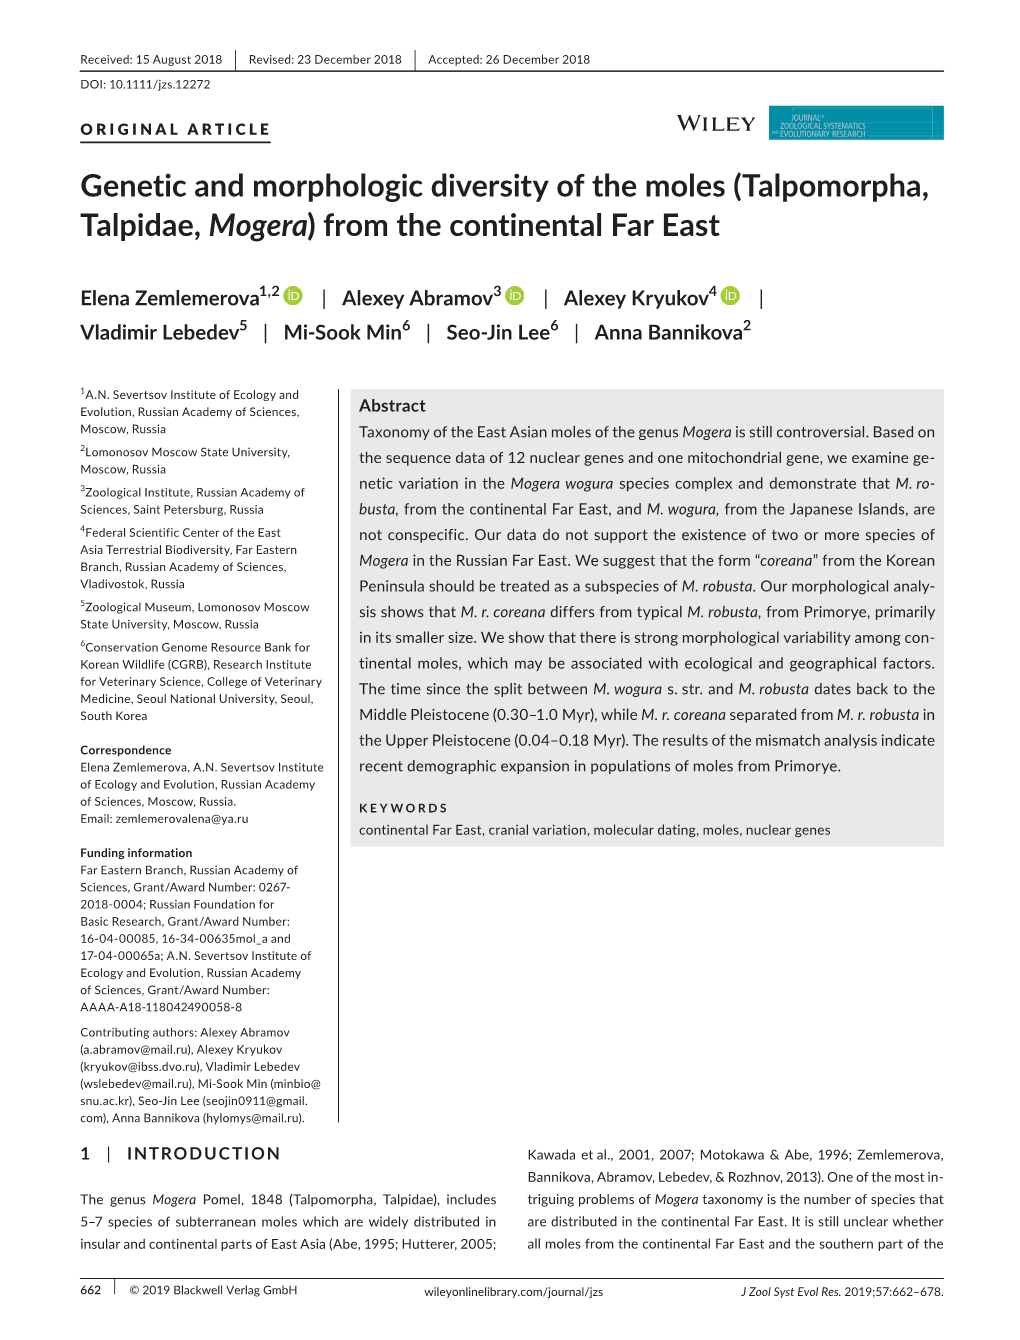 Genetic and Morphologic Diversity of the Moles (Talpomorpha, Talpidae, Mogera) from the Continental Far East